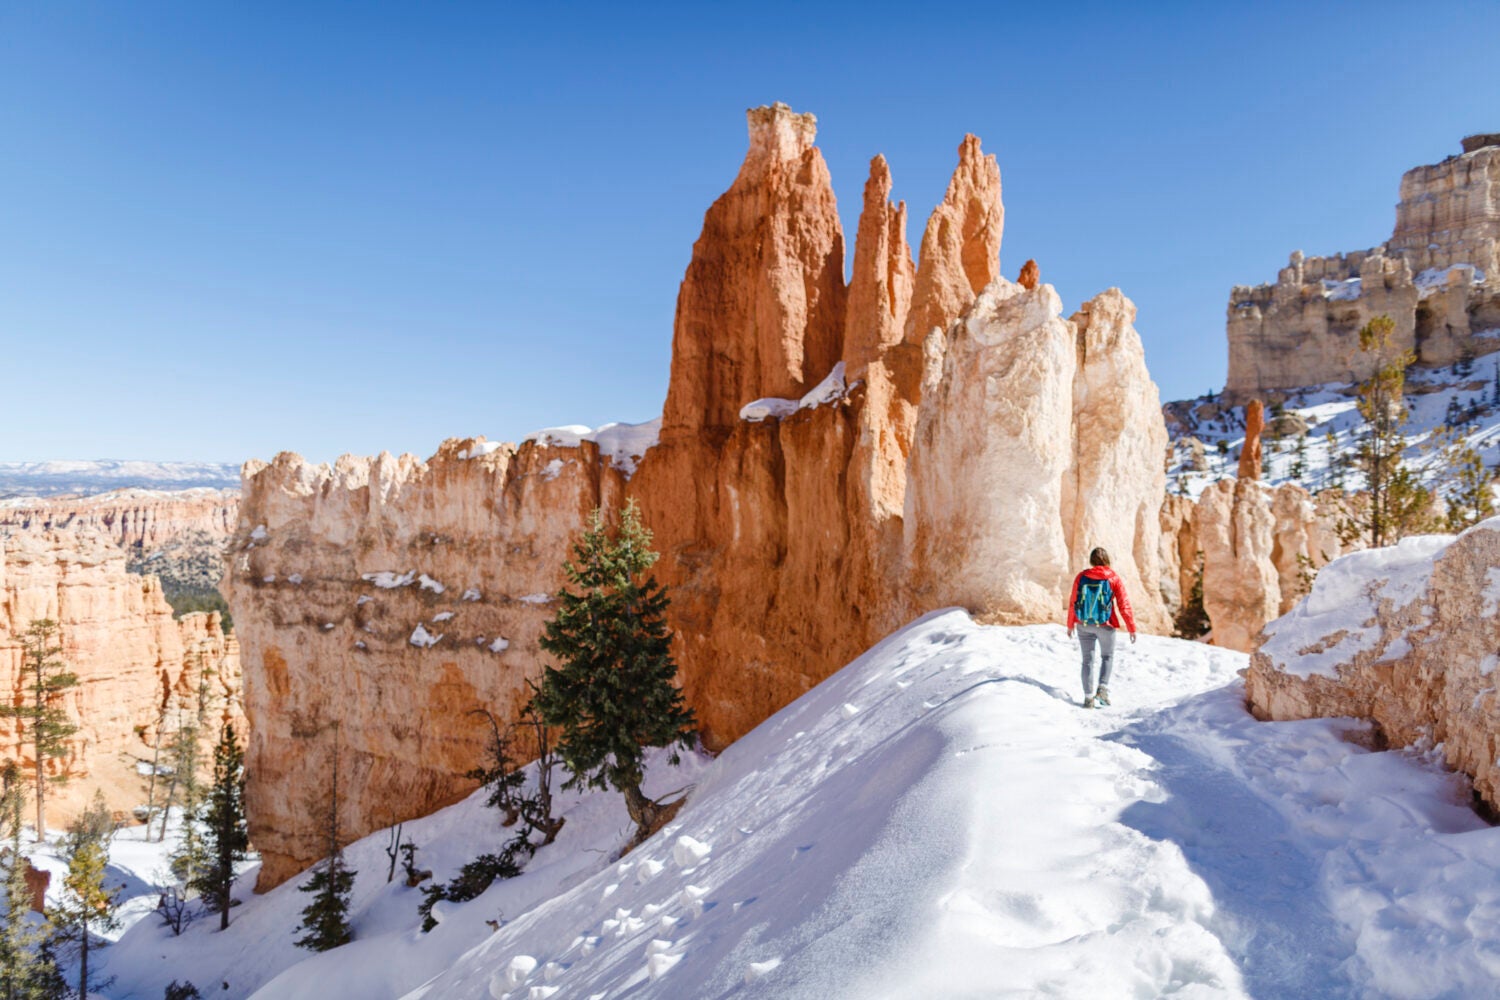 Lone hiker at Snow covered Bryce Canyon